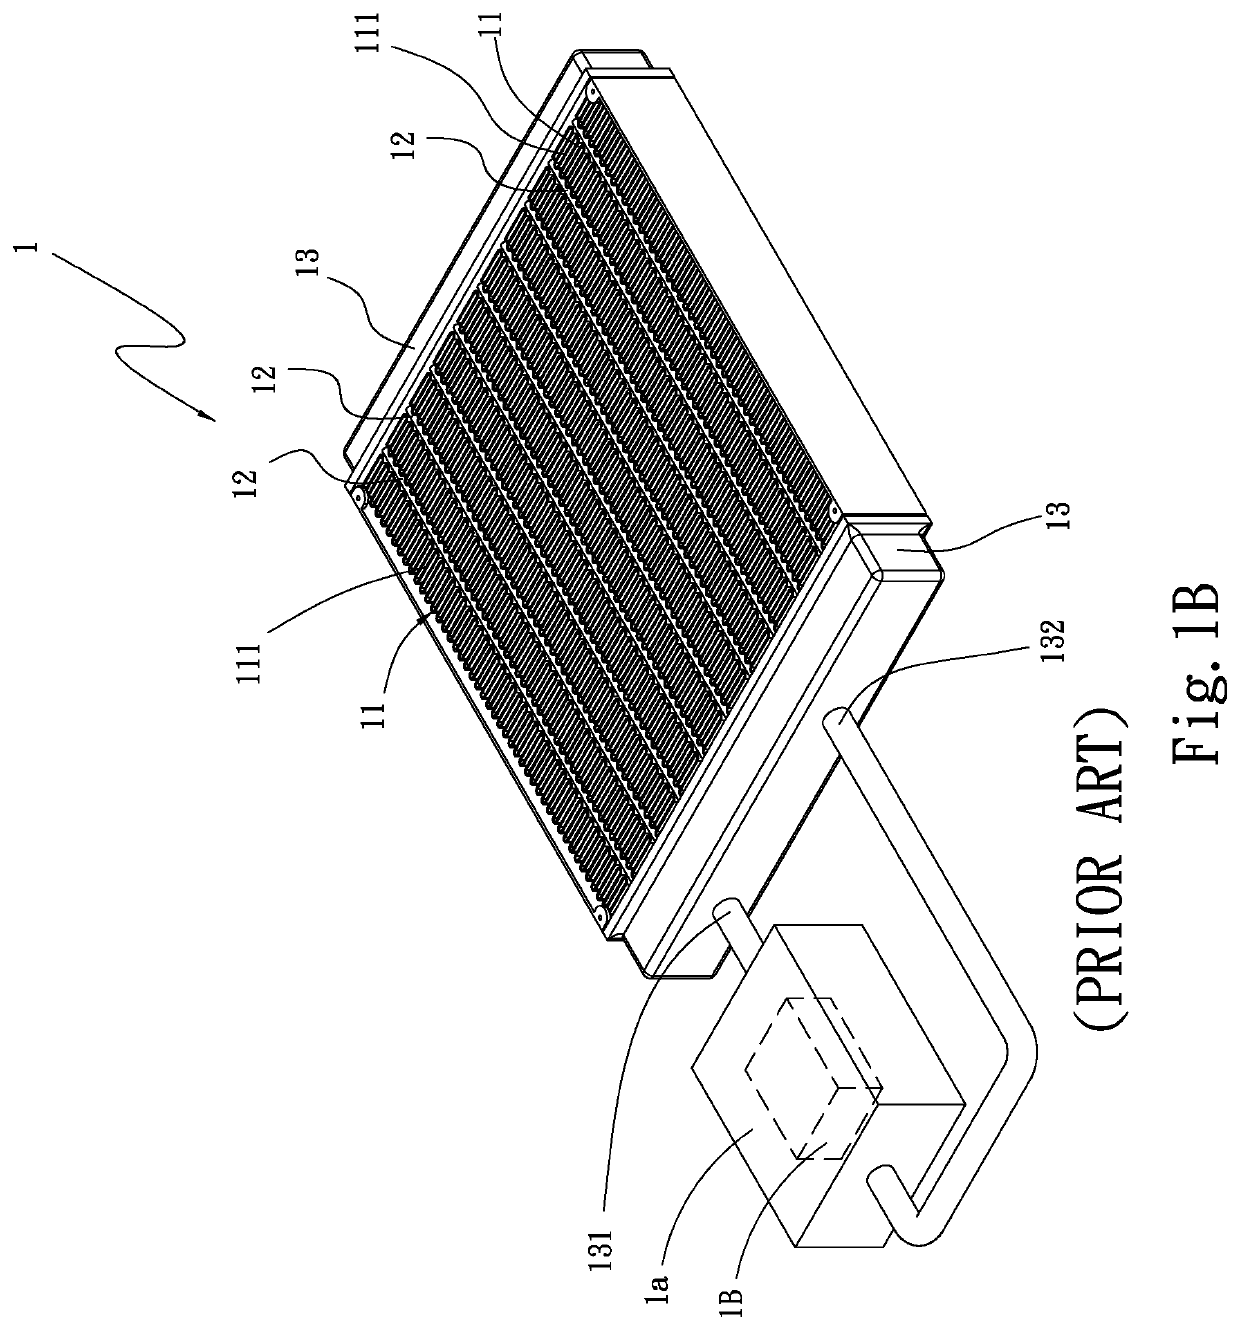 Composite water-cooling radiator structure